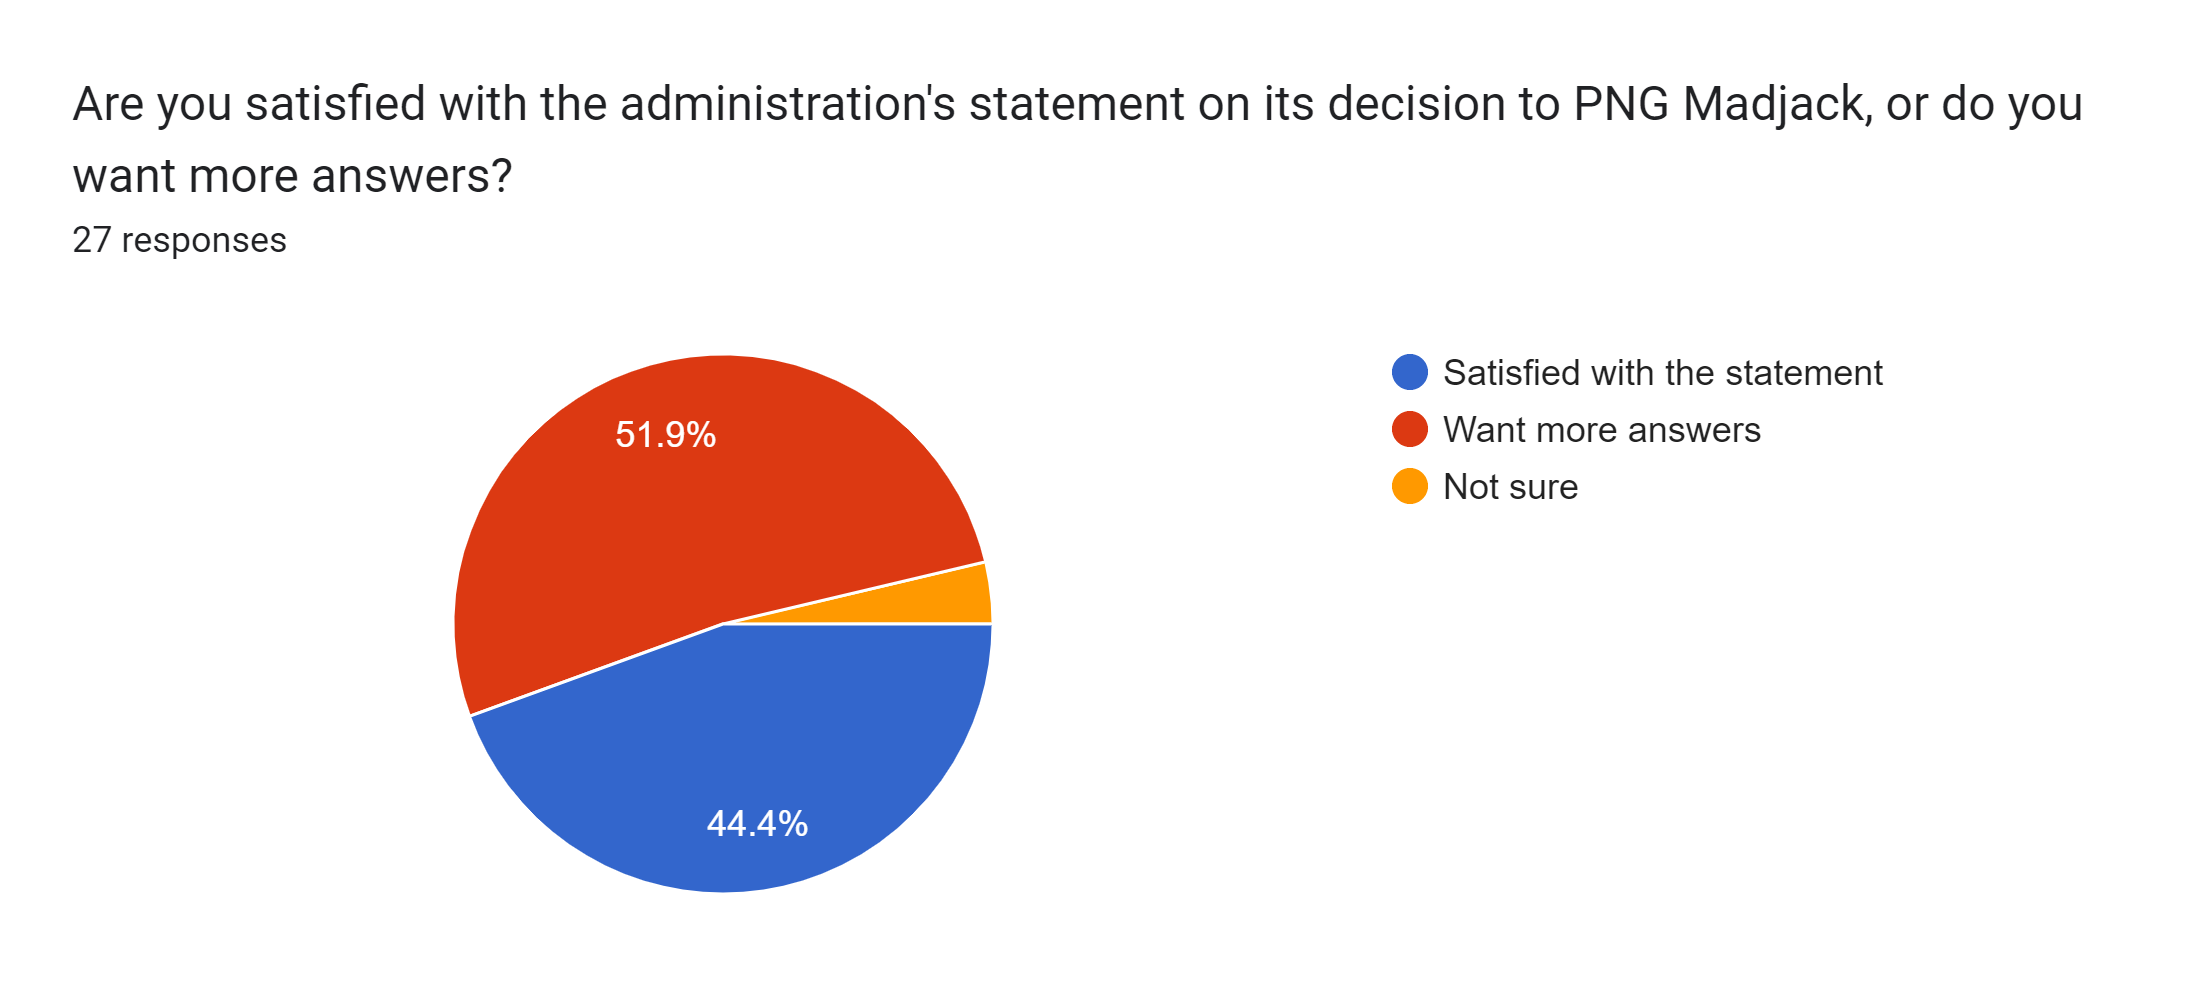 Forms response chart. Question title: Are you satisfied with the administration's statement on its decision to PNG Madjack, or do you want more answers?. Number of responses: 27 responses.